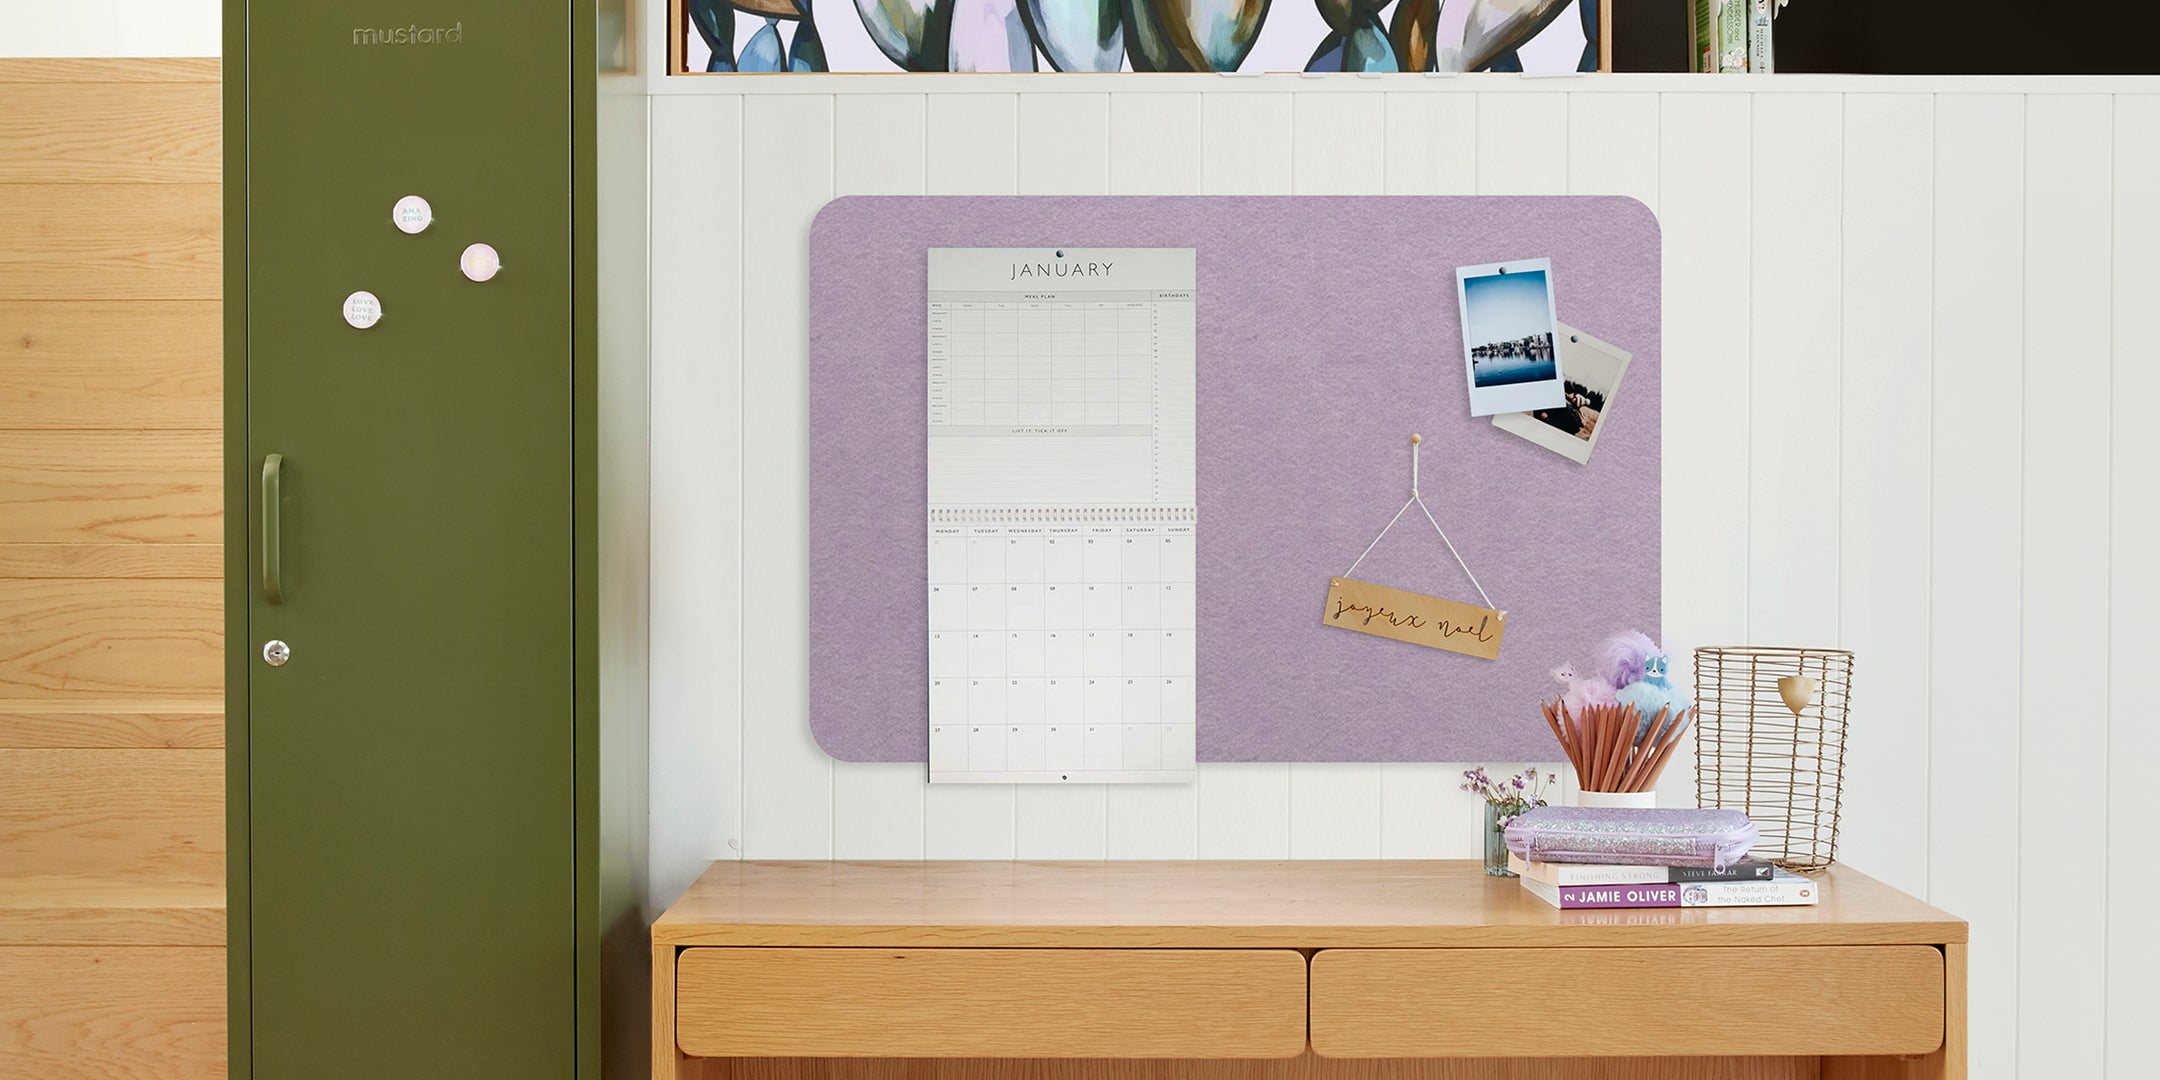 LILLY AND LOLLY have designed a range of colourful pinboards for both your home and office. Easy to install and lightweight, they are sure to help you get organised and stay on track with events.